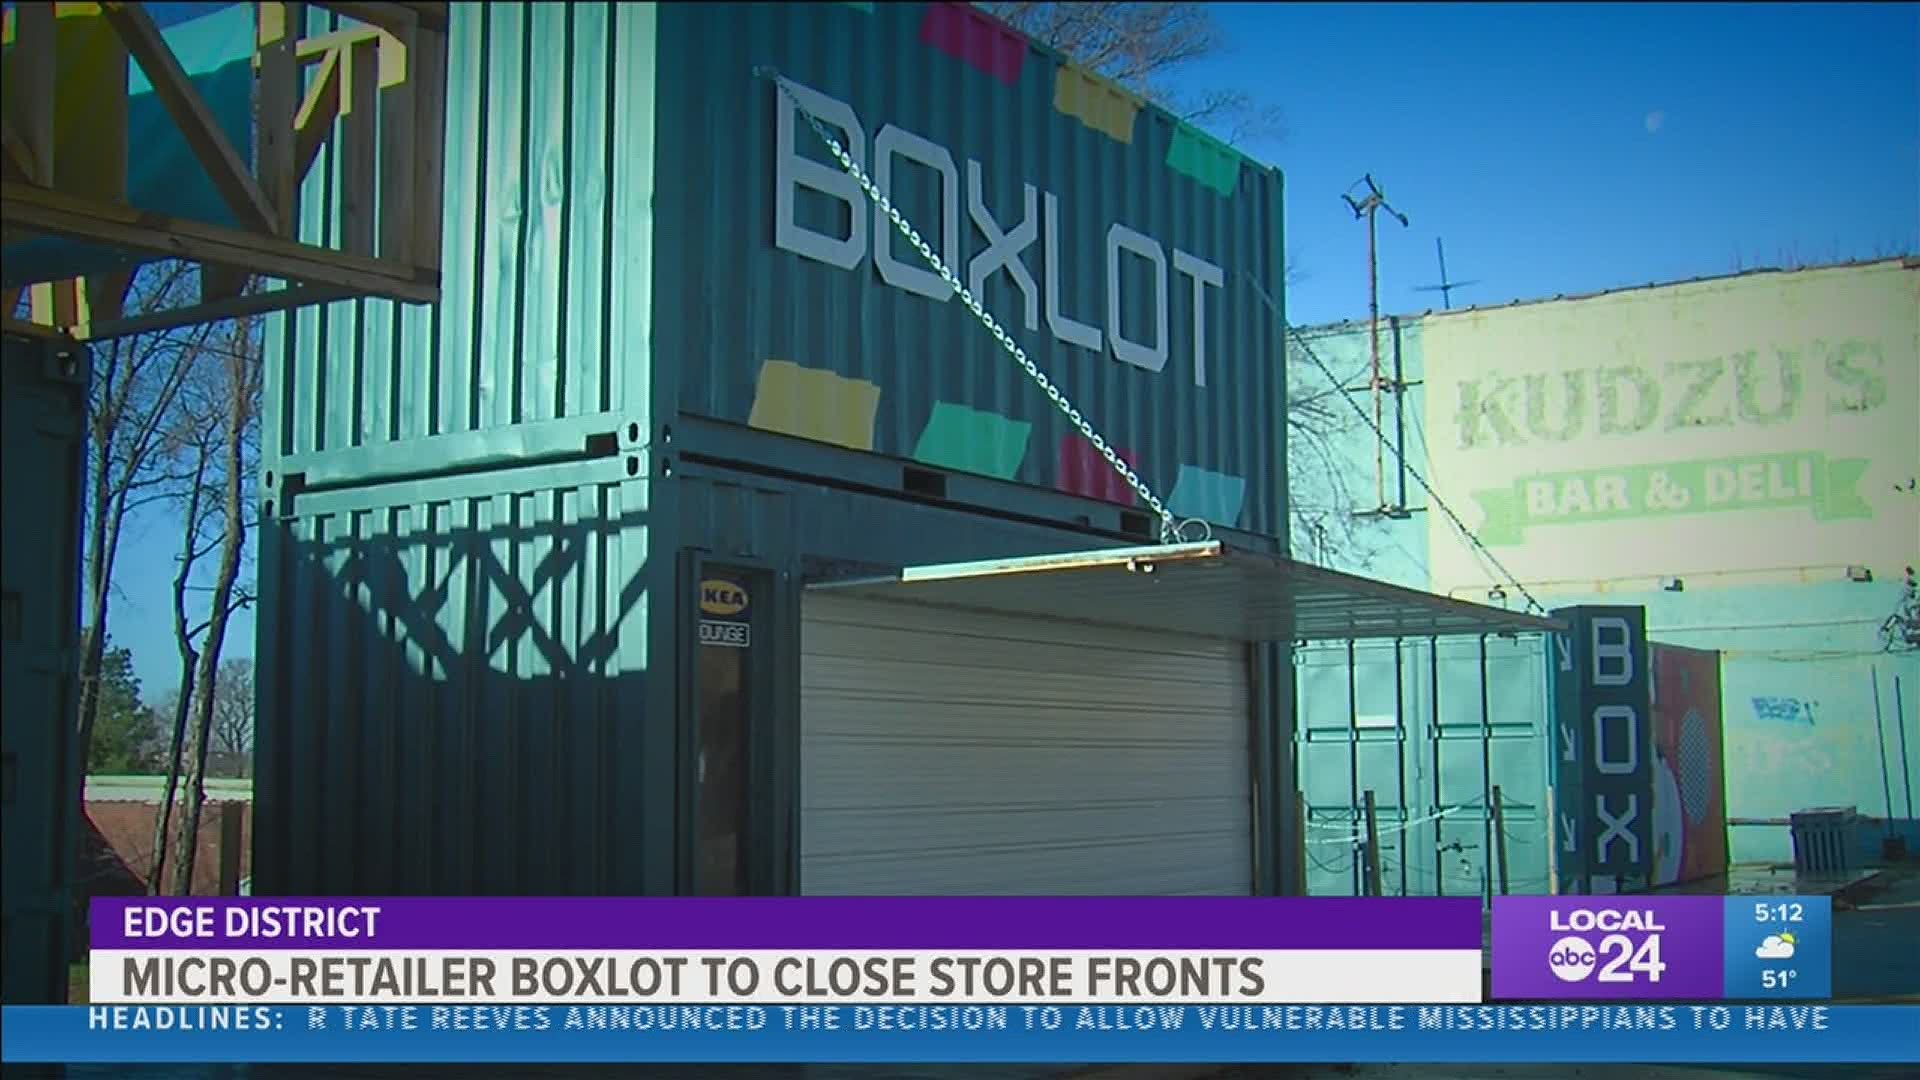 The shipping container building that helps small businesses announced it will close this month.